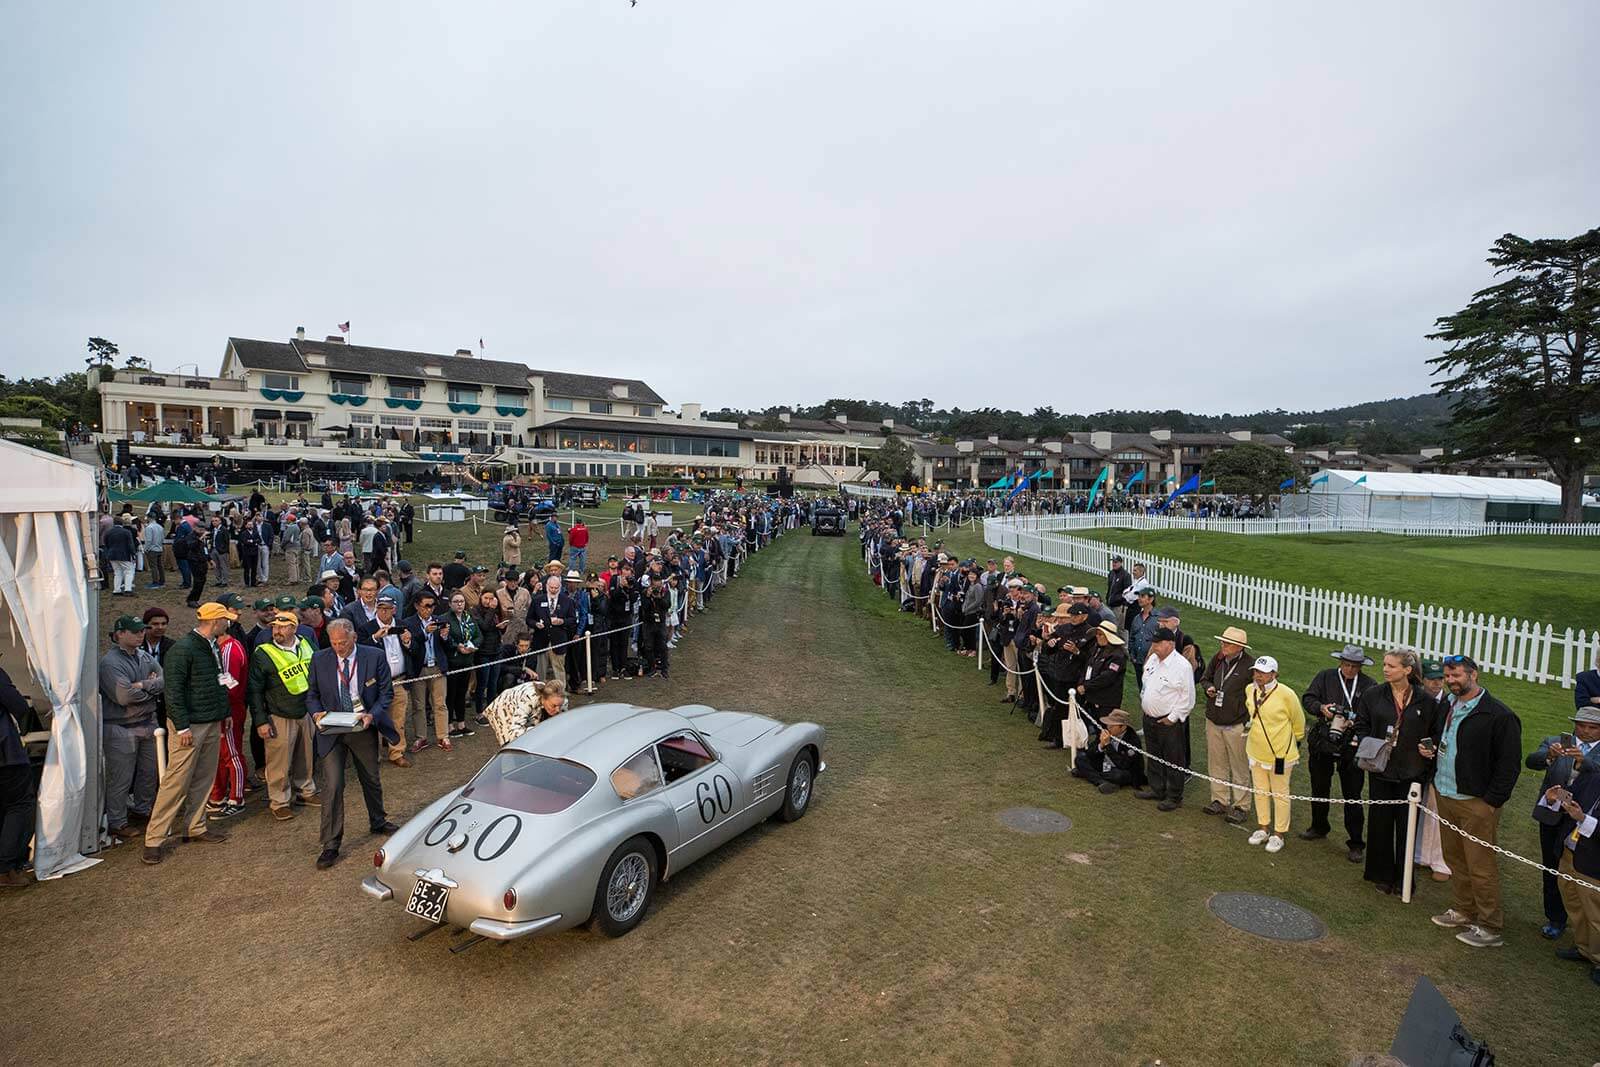 Dawn Patrol presented by Hagerty at the Pebble Beach Concours d'Elegance